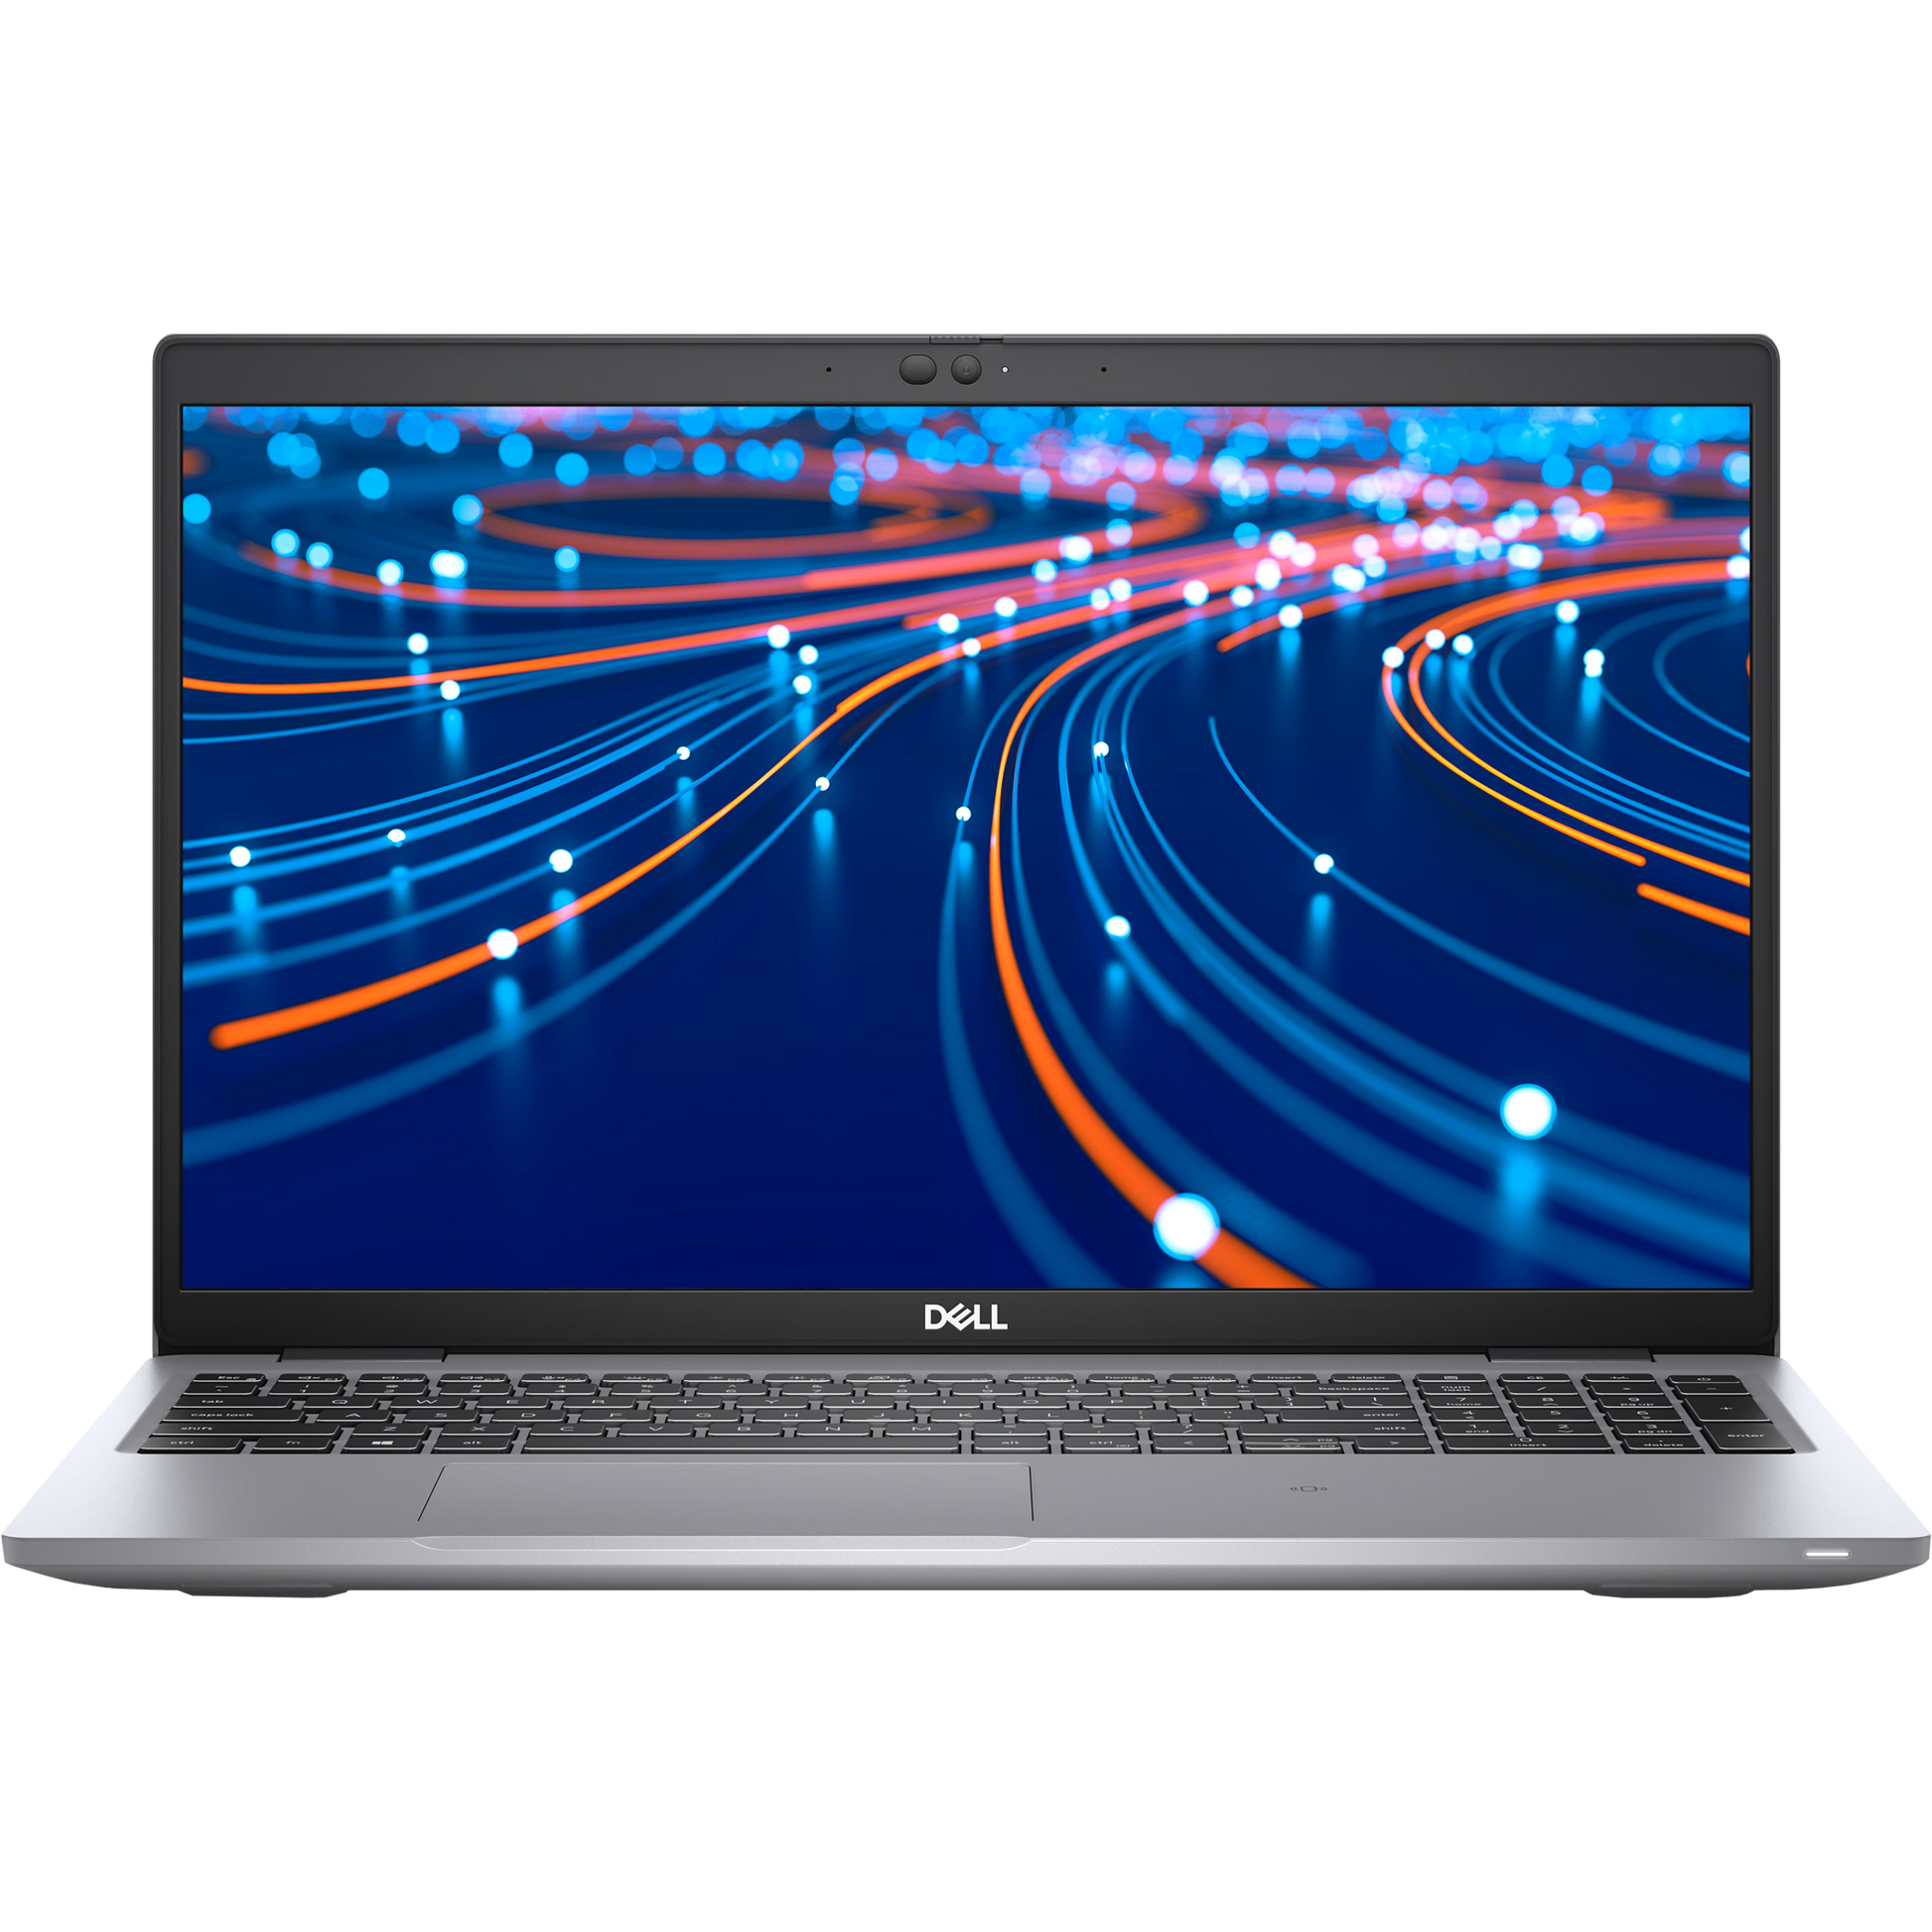 Dell Latitude 5520 Intel i5, 11th Gen Laptop with 16GB + Win 11 Laptops - Refurbished